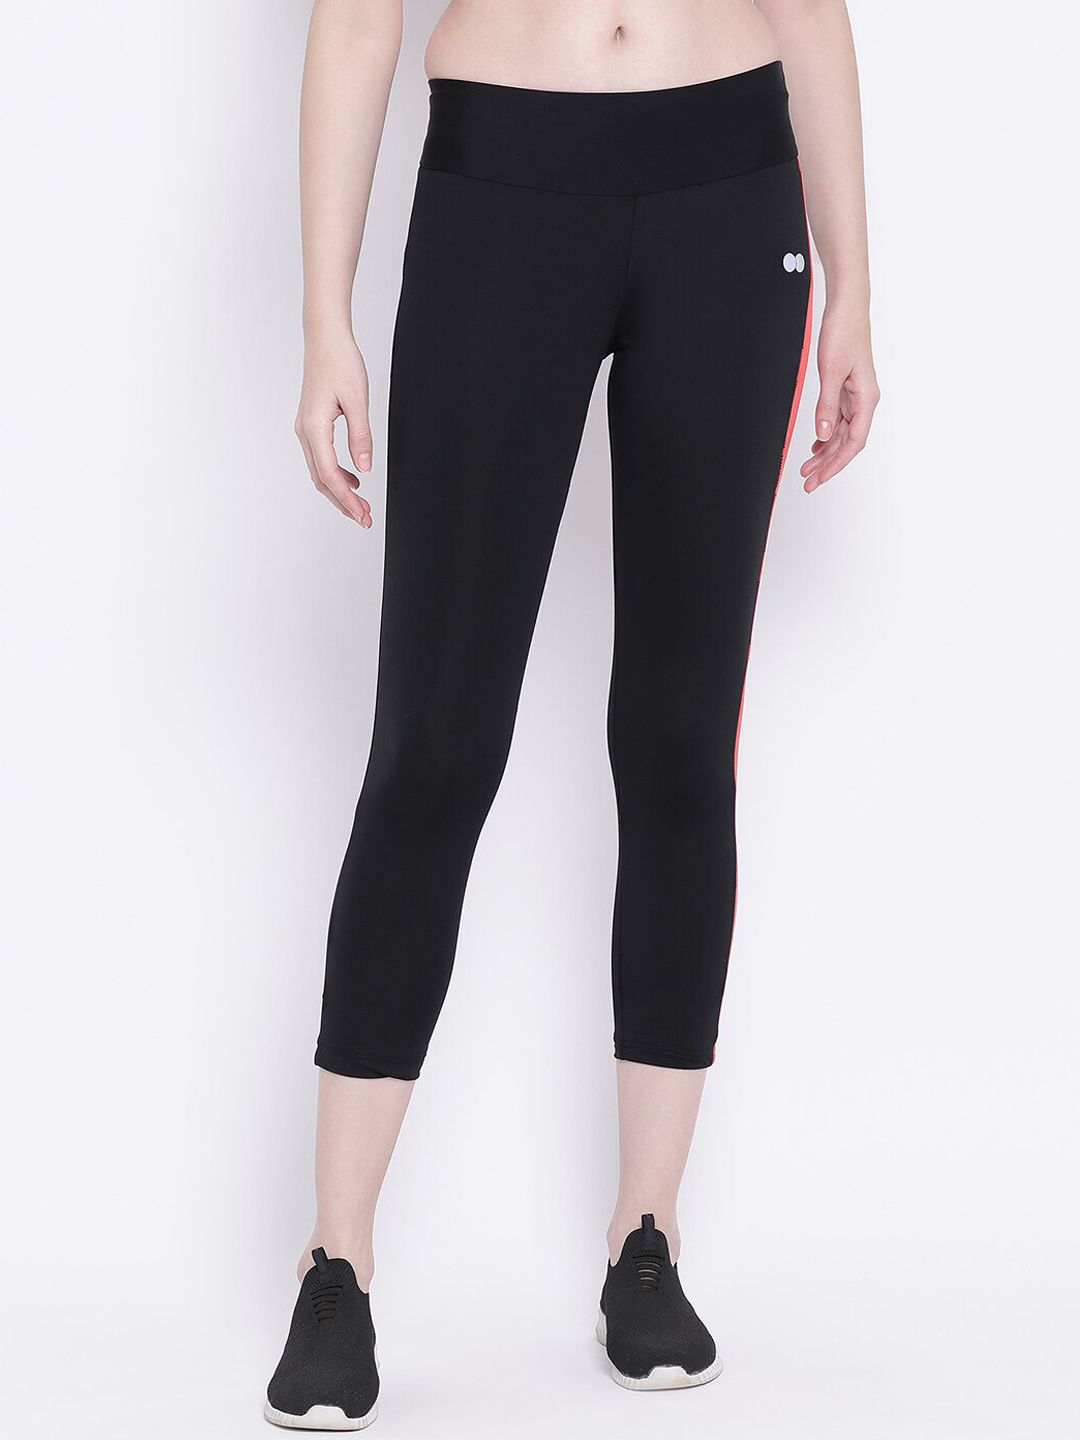 Clovia Women Black & Coral-Red Colourblocked Training or Gym Activewear Tights Price in India